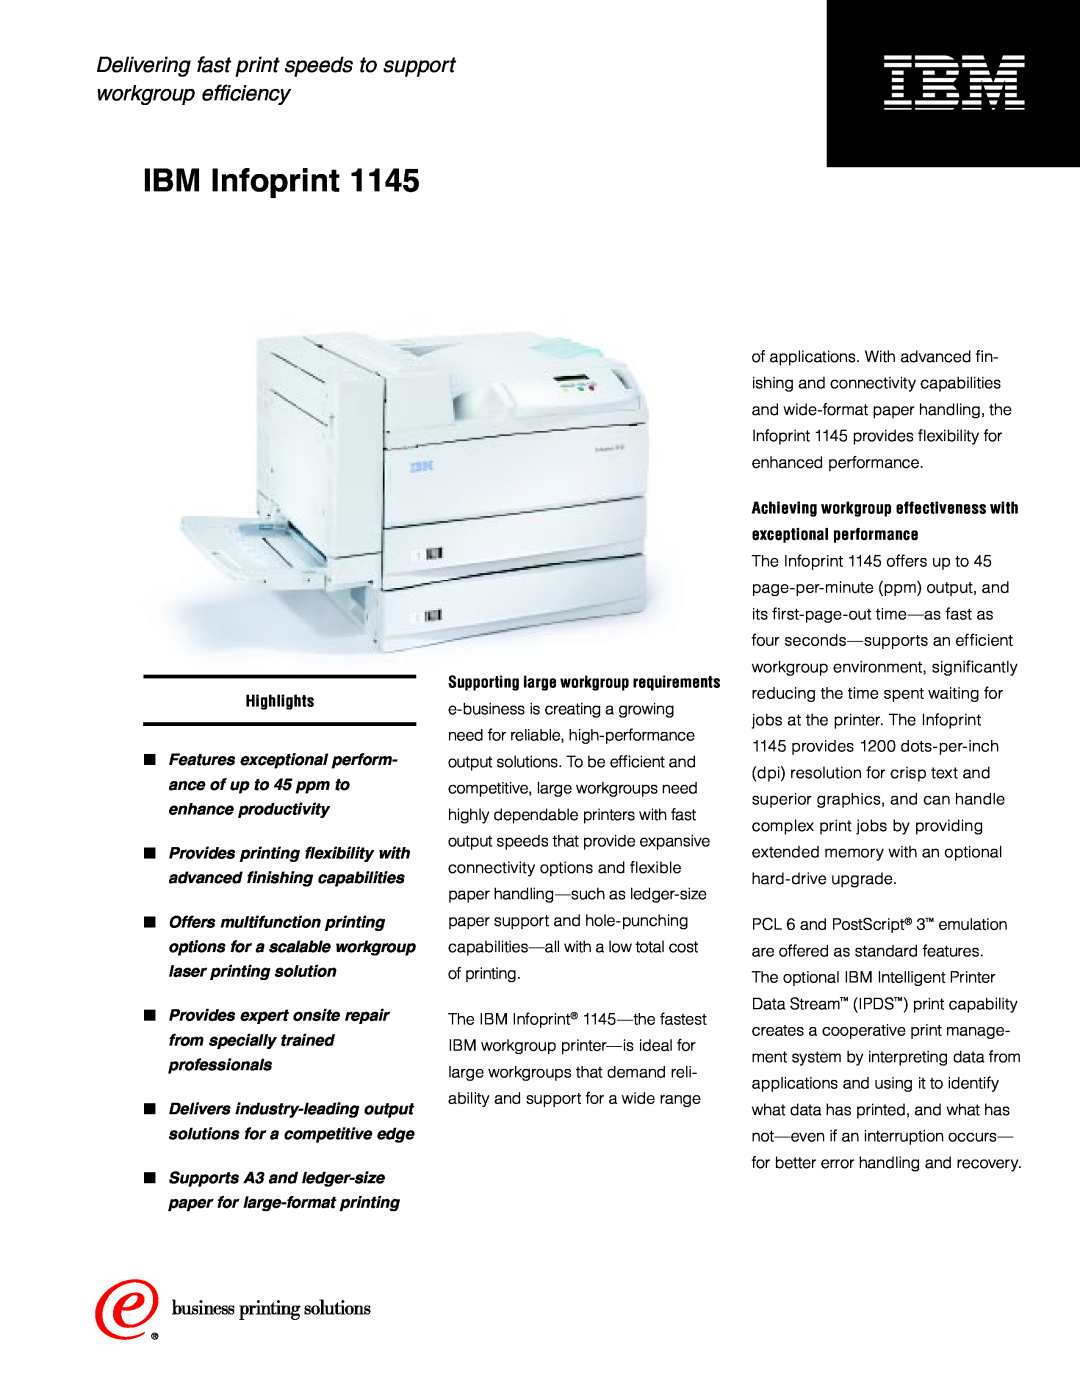 IBM 1145 manual Highlights, Achieving workgroup effectiveness with exceptional performance, IBM Infoprint 